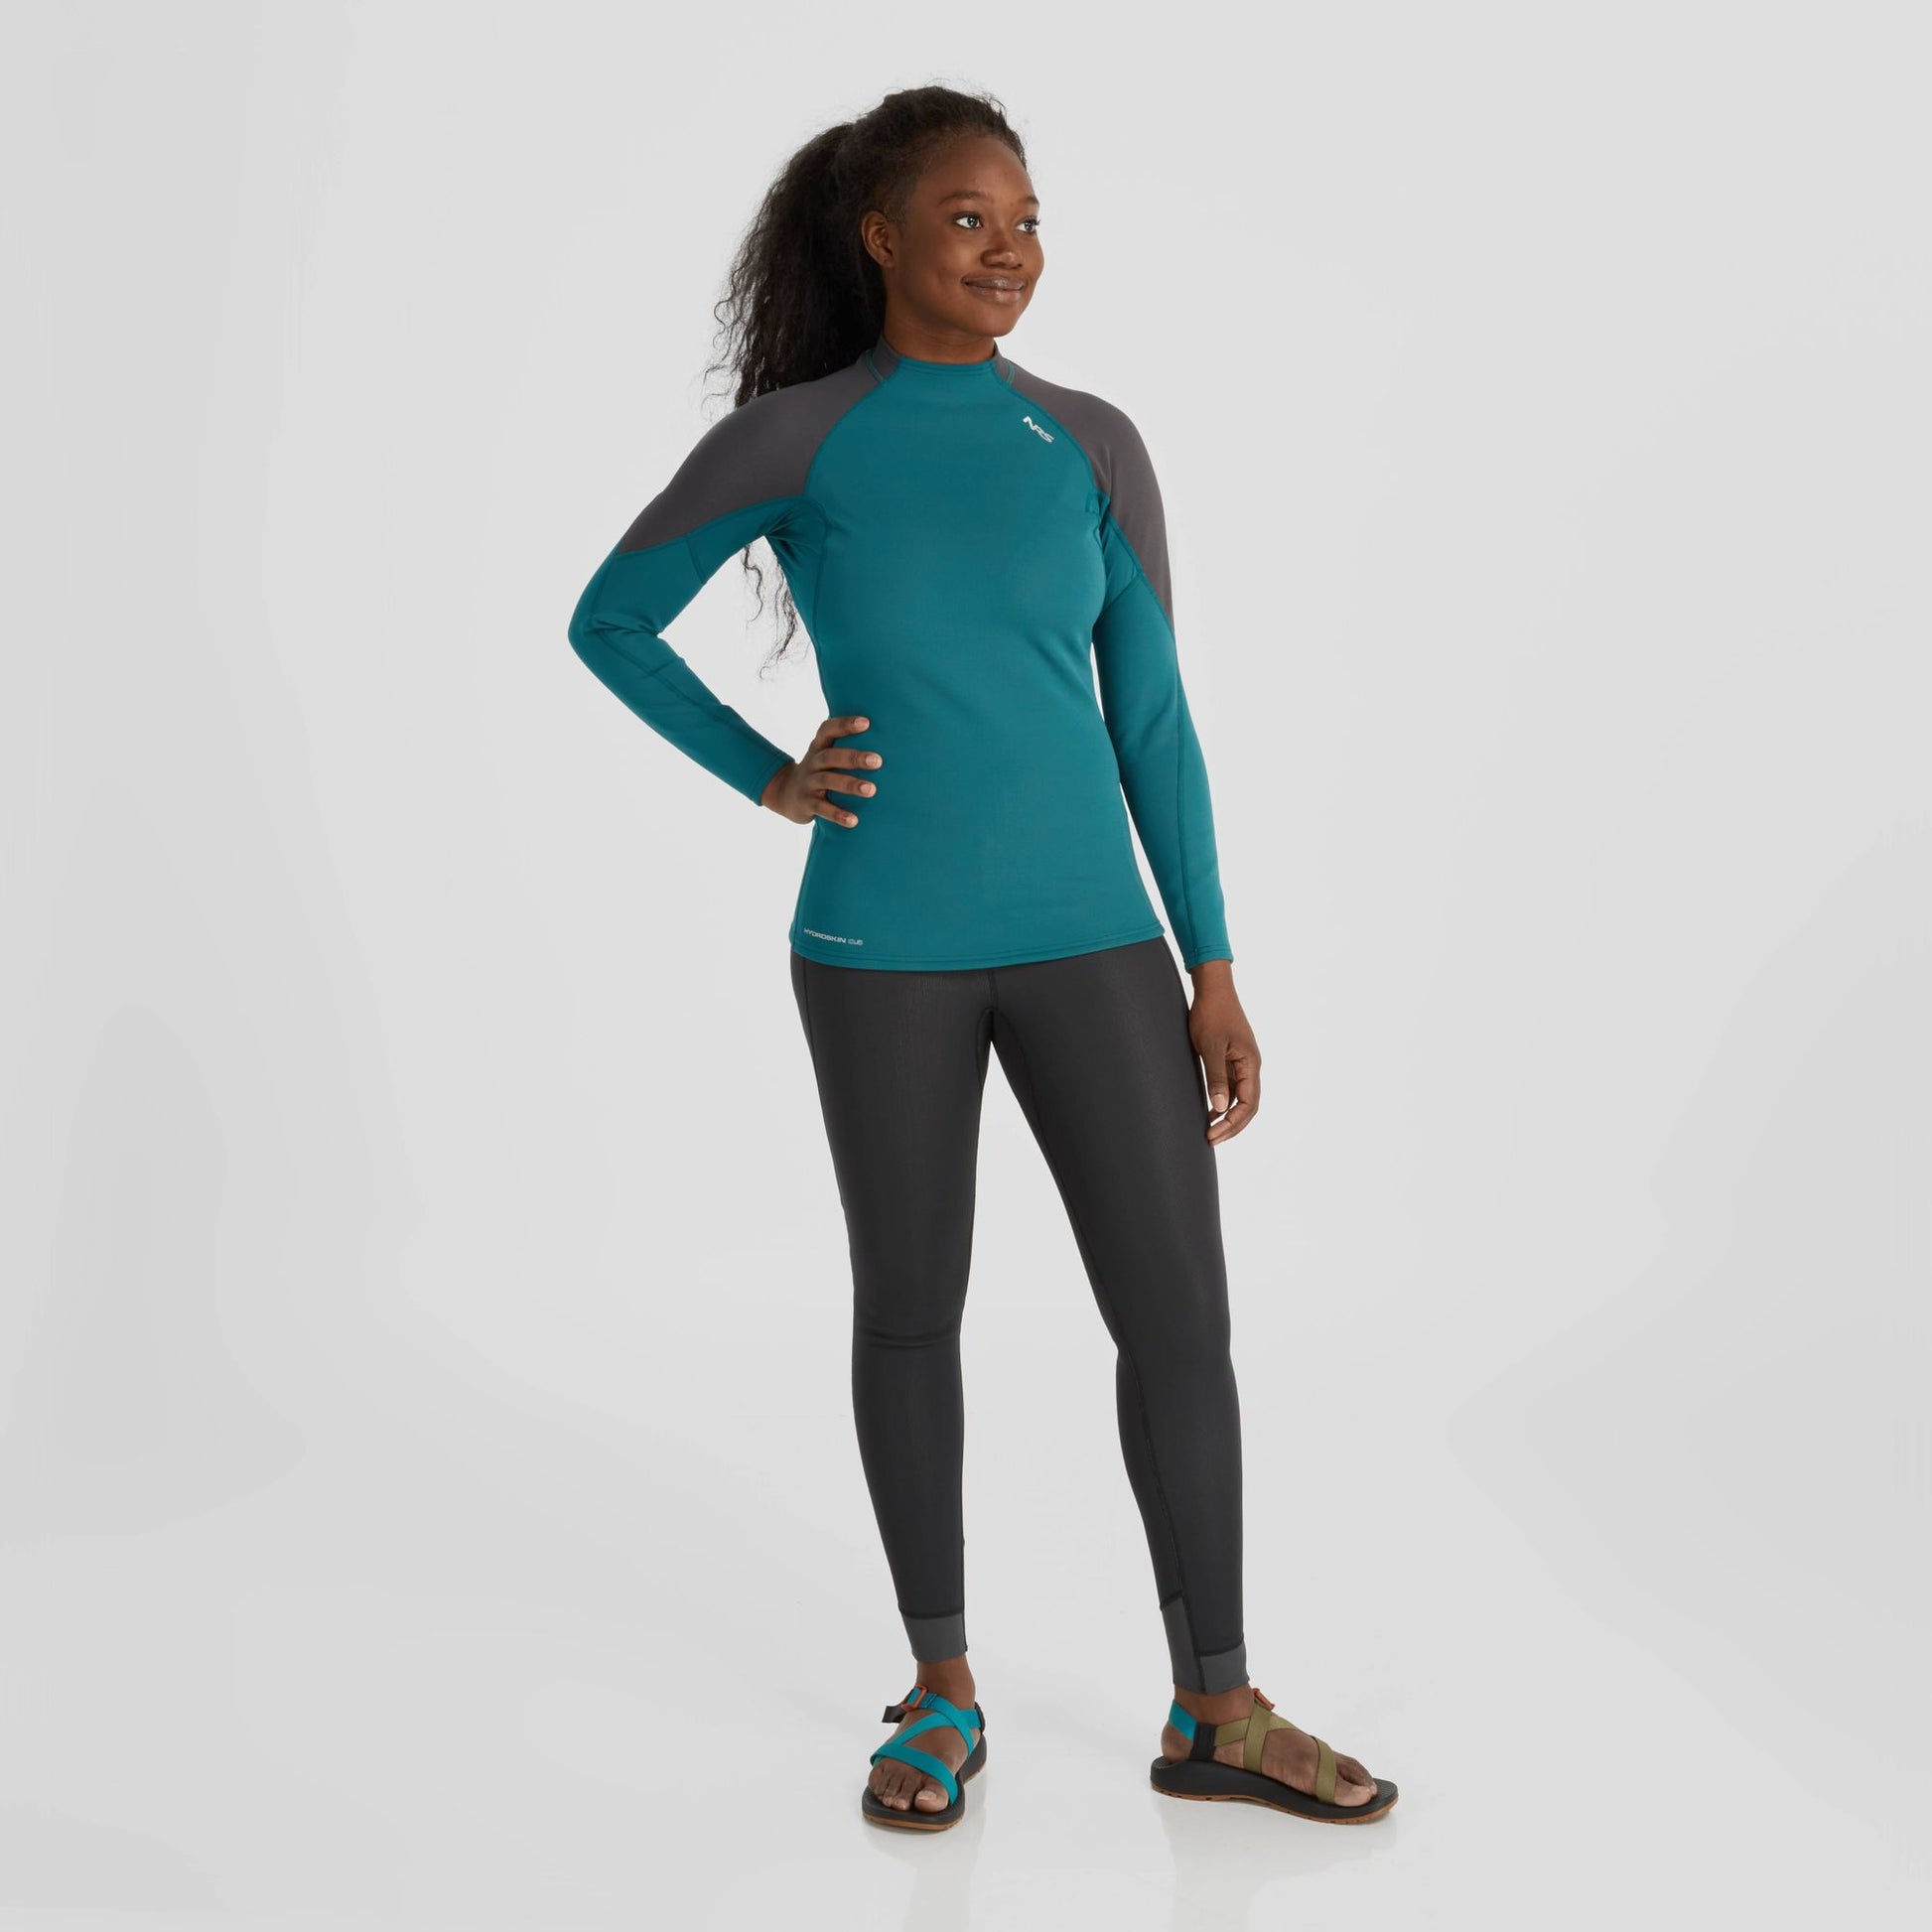 A woman donning the NRS Hydroskin 0.5 Long Sleeve Shirt - Women's, an insulating top and leggings, for her layering arsenal.